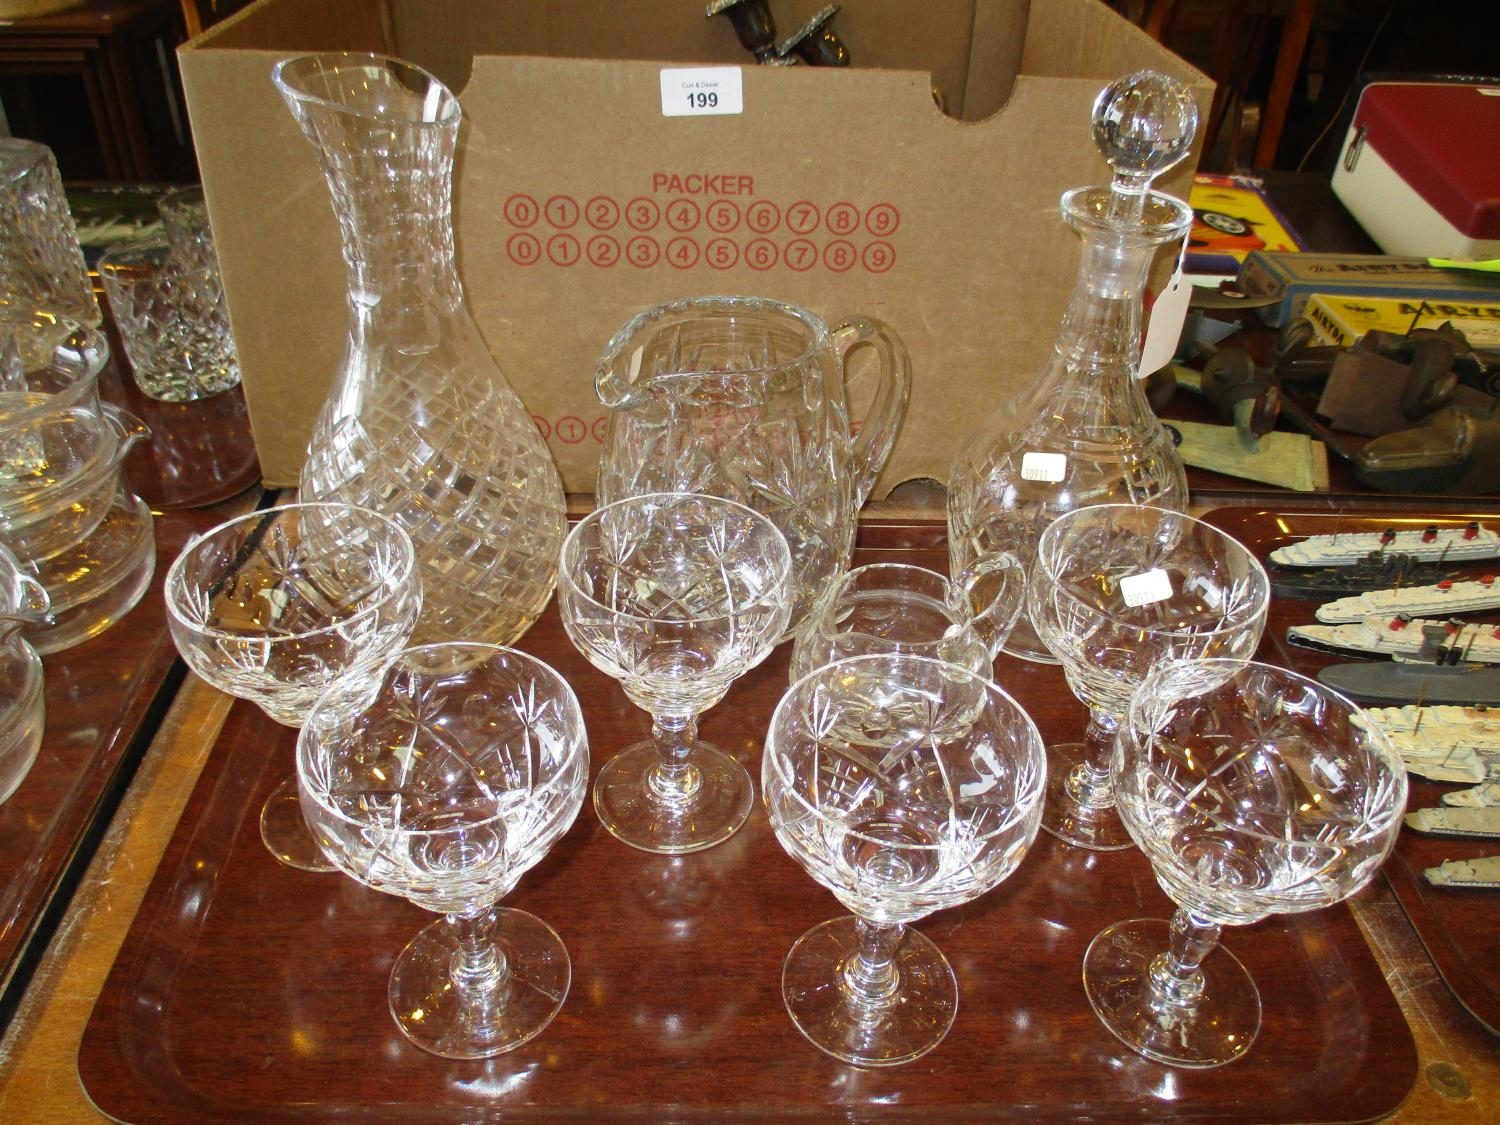 Set of 6 Crystal Cocktail Glasses, 2 Jugs, Decanter and Carafe